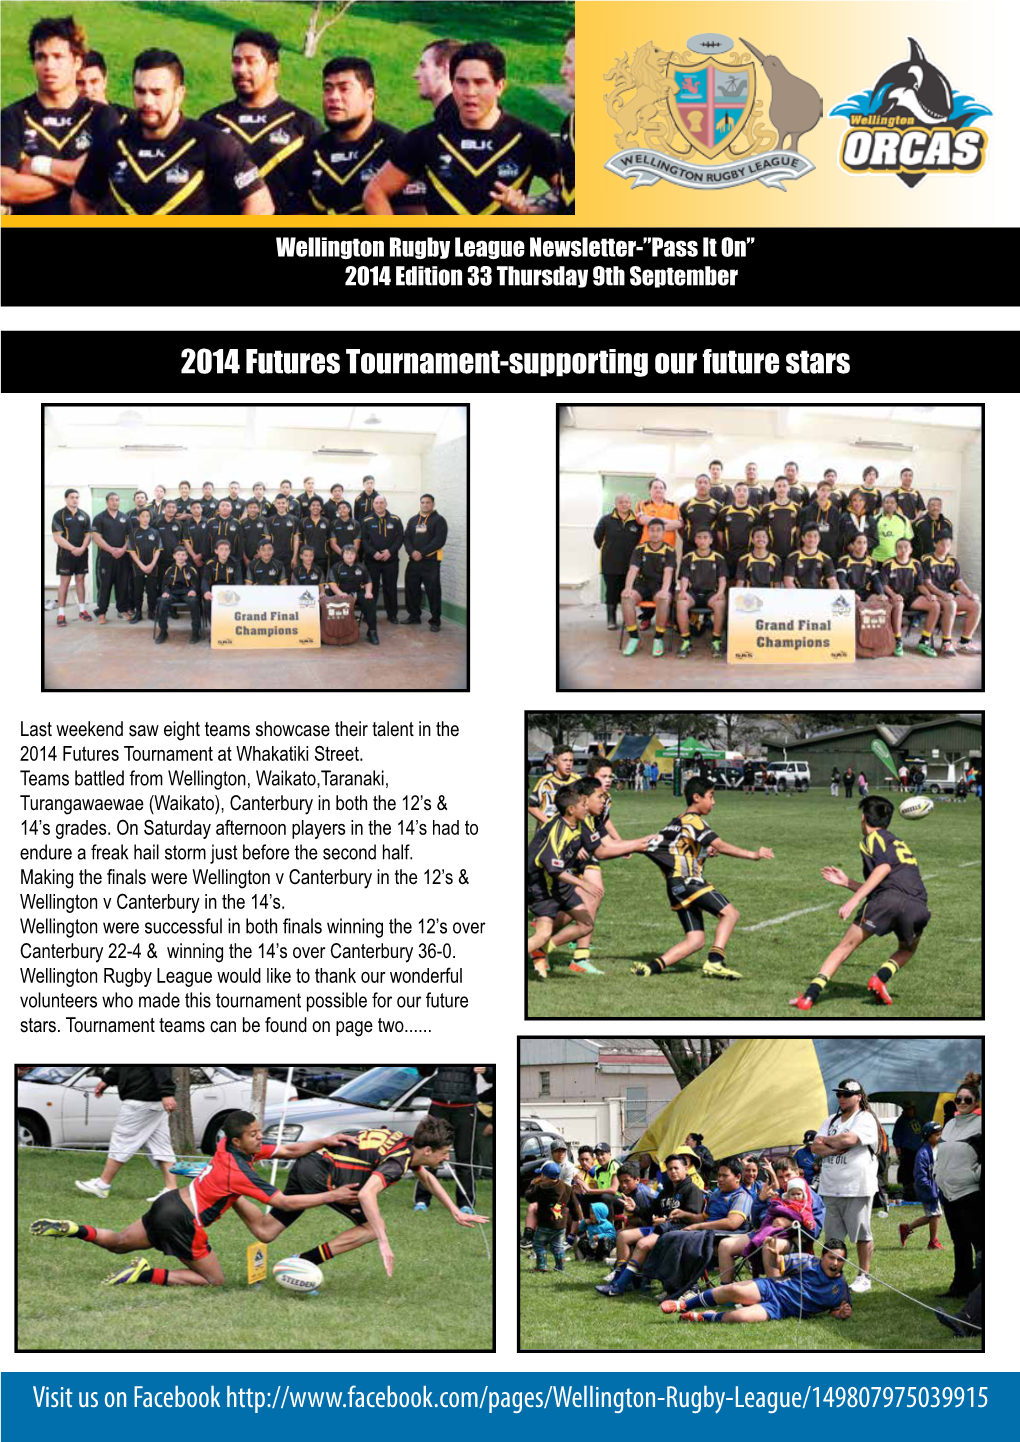 Visit Us on Facebook 2014 Futures Tournament-Supporting Our Future Stars